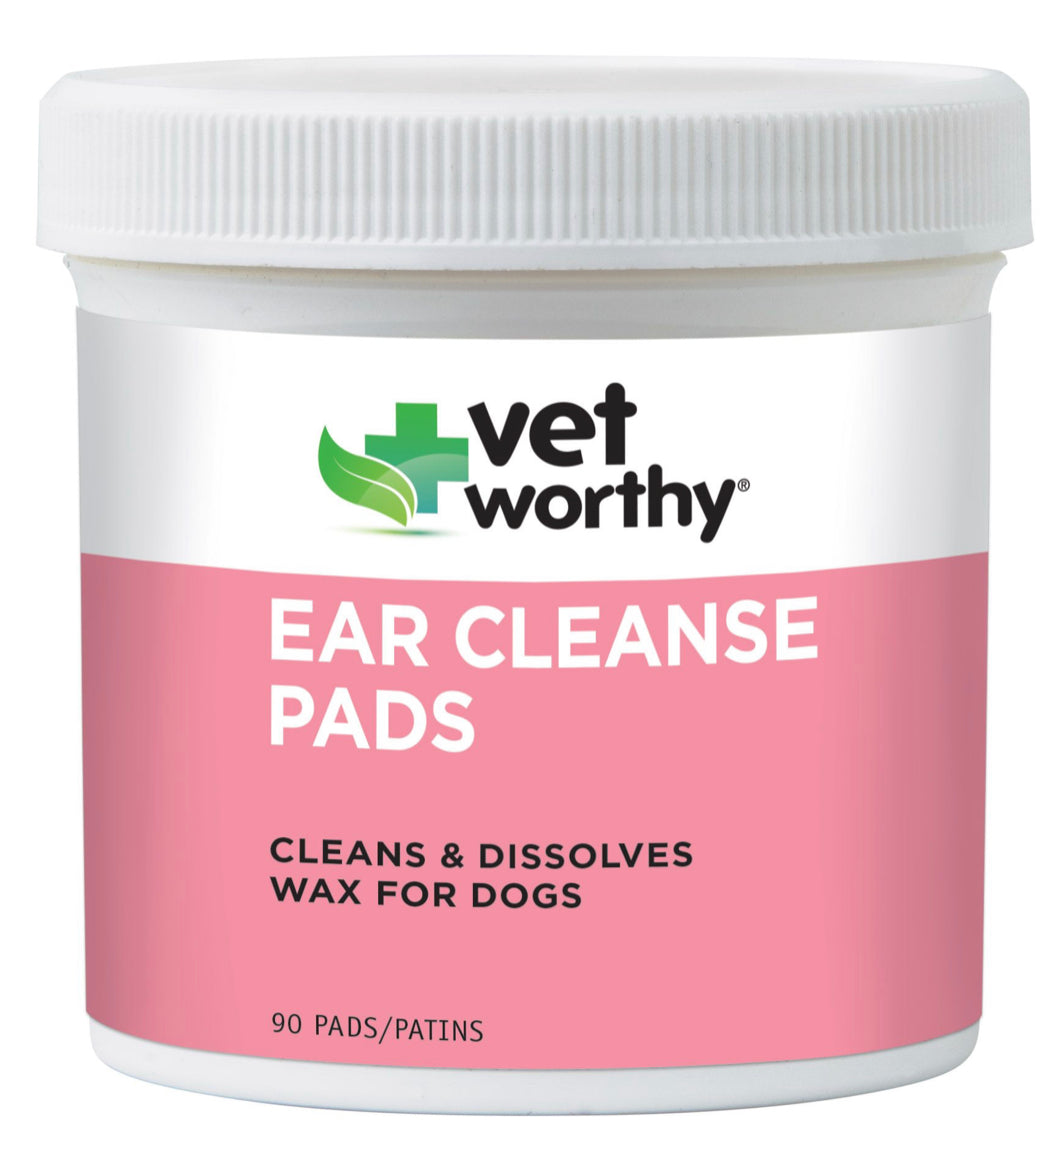 Ear Cleanse Pads